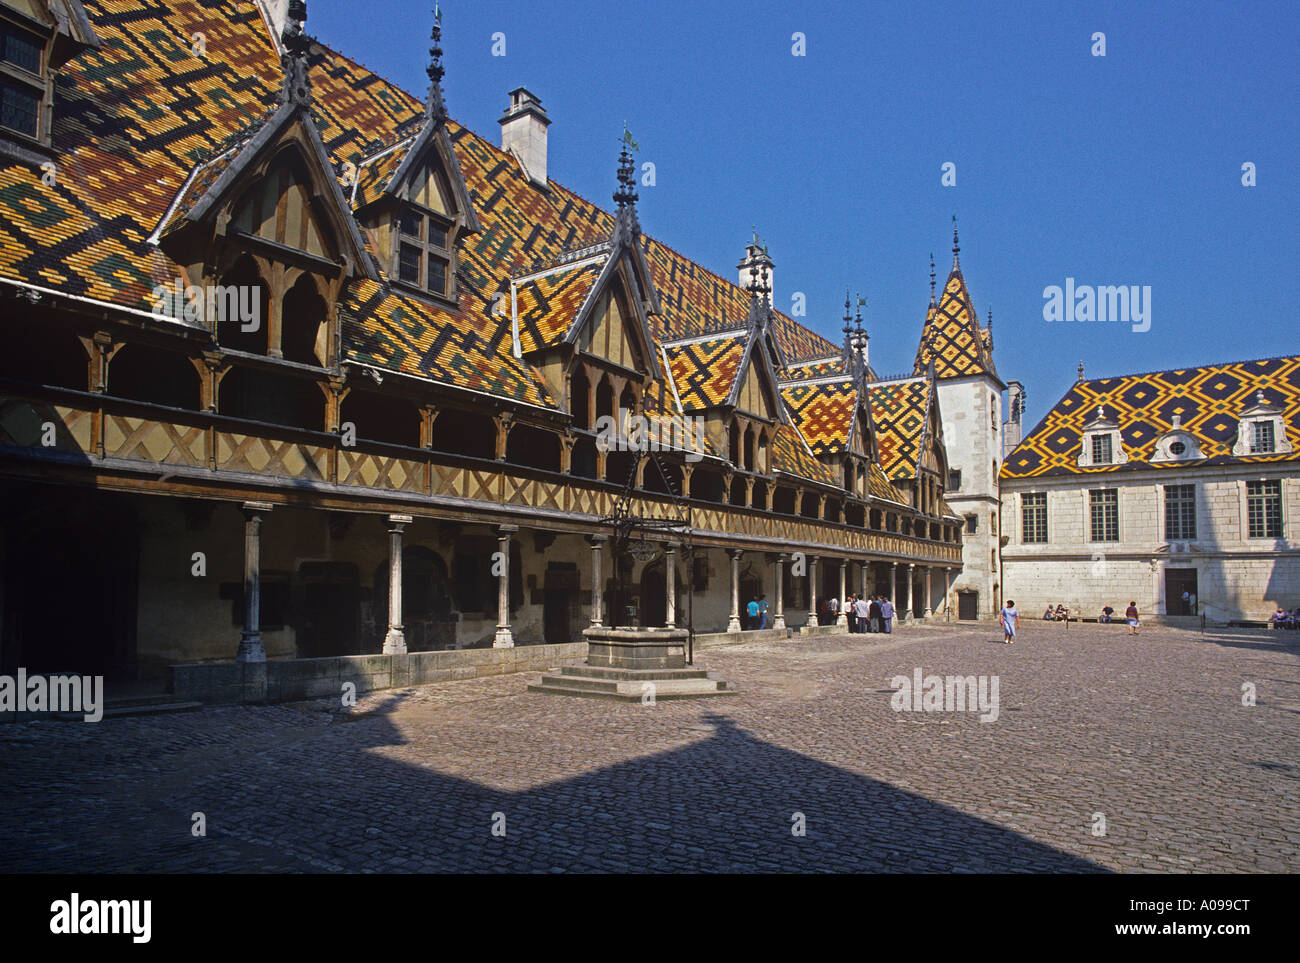 Hotel Dieu medieval hospital founded in 1443 by Chancellor Nicolas Rolin in the City of Beaune Stock Photo